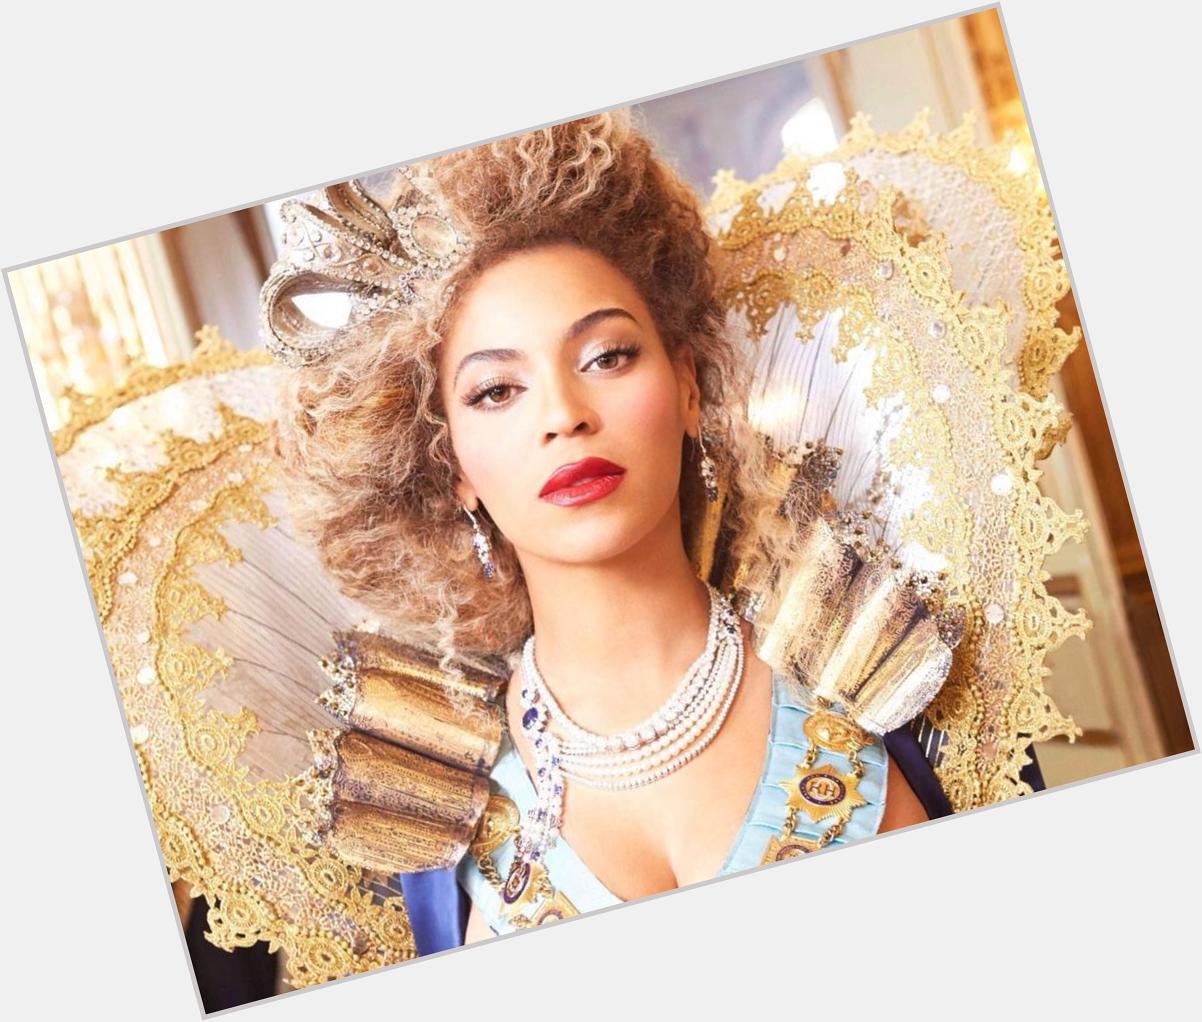 Happy birthday to the beautiful queen Beyoncé Knowles Carter She\s been my biggest idol for so many years now 